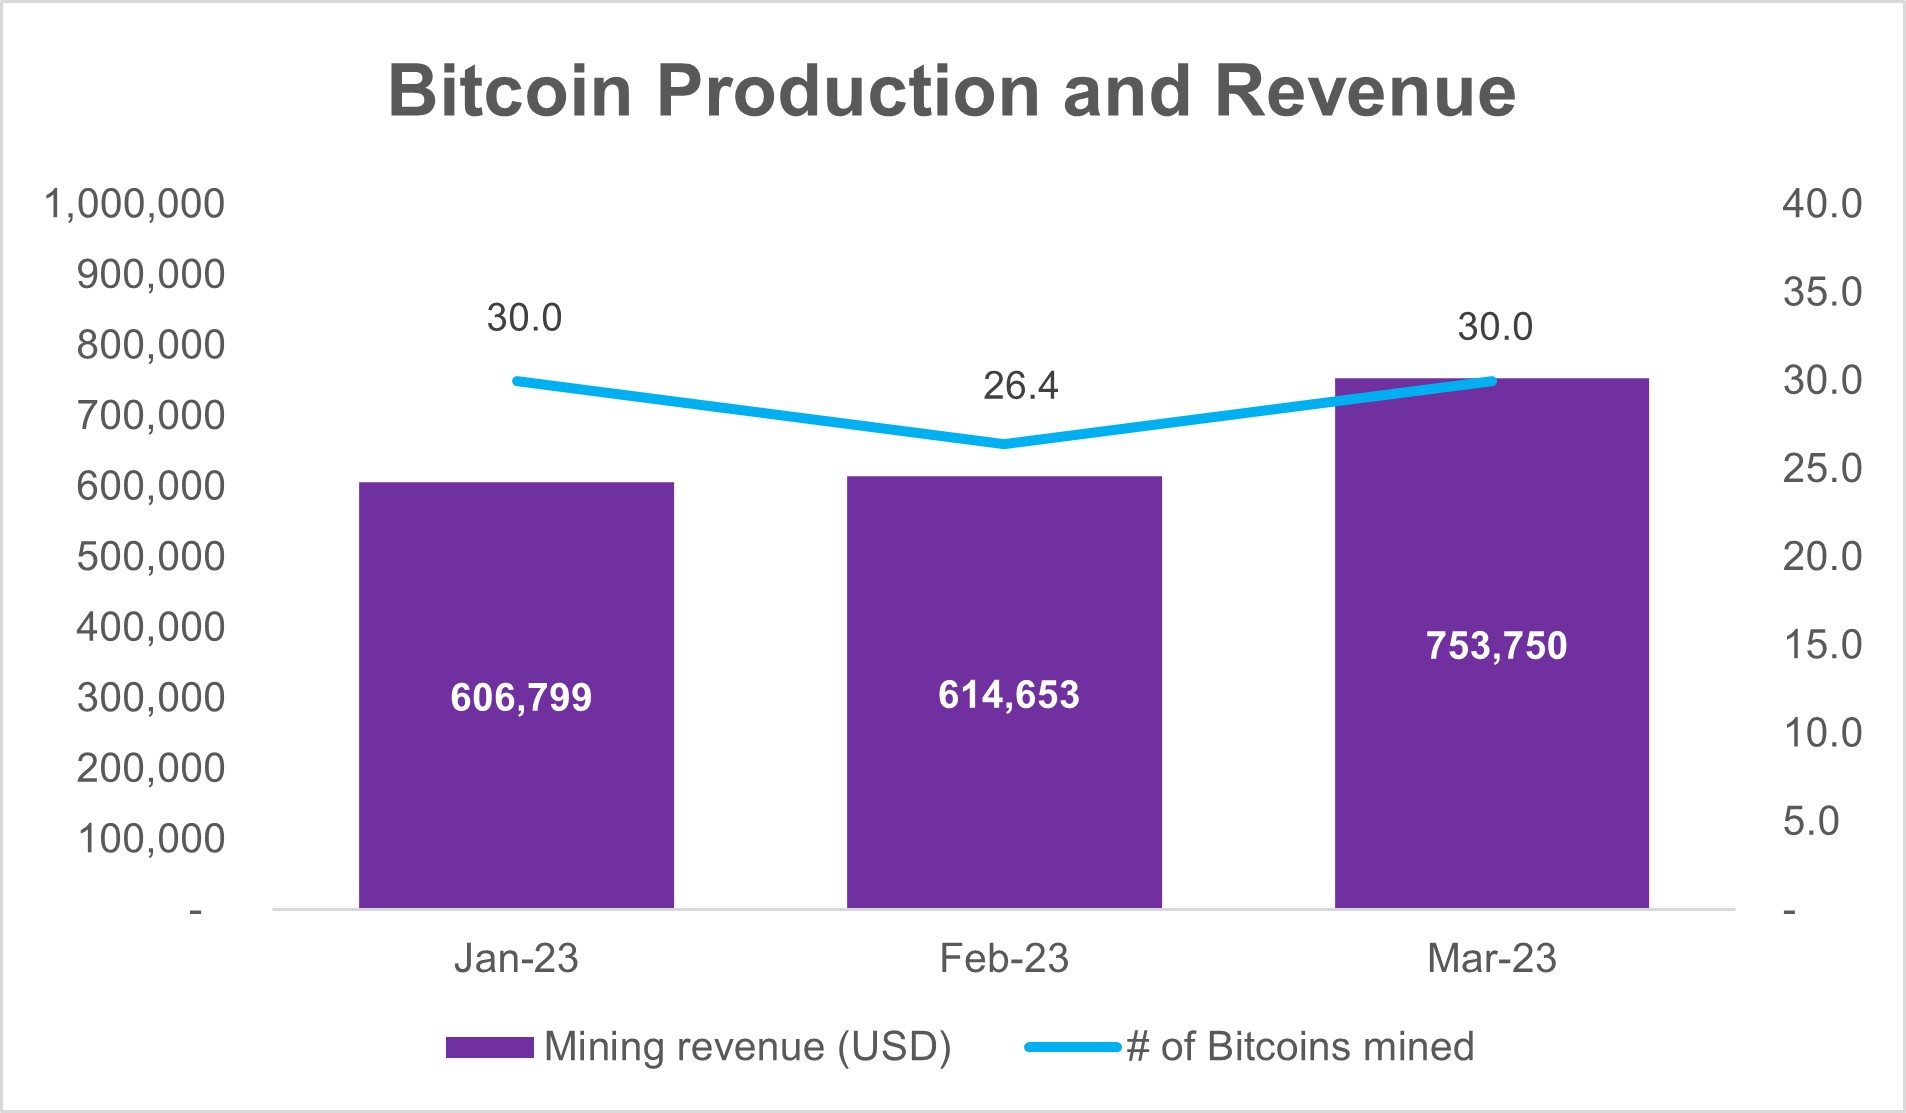 86.4 Bitcoins Mined and revenue of US$1,975,202